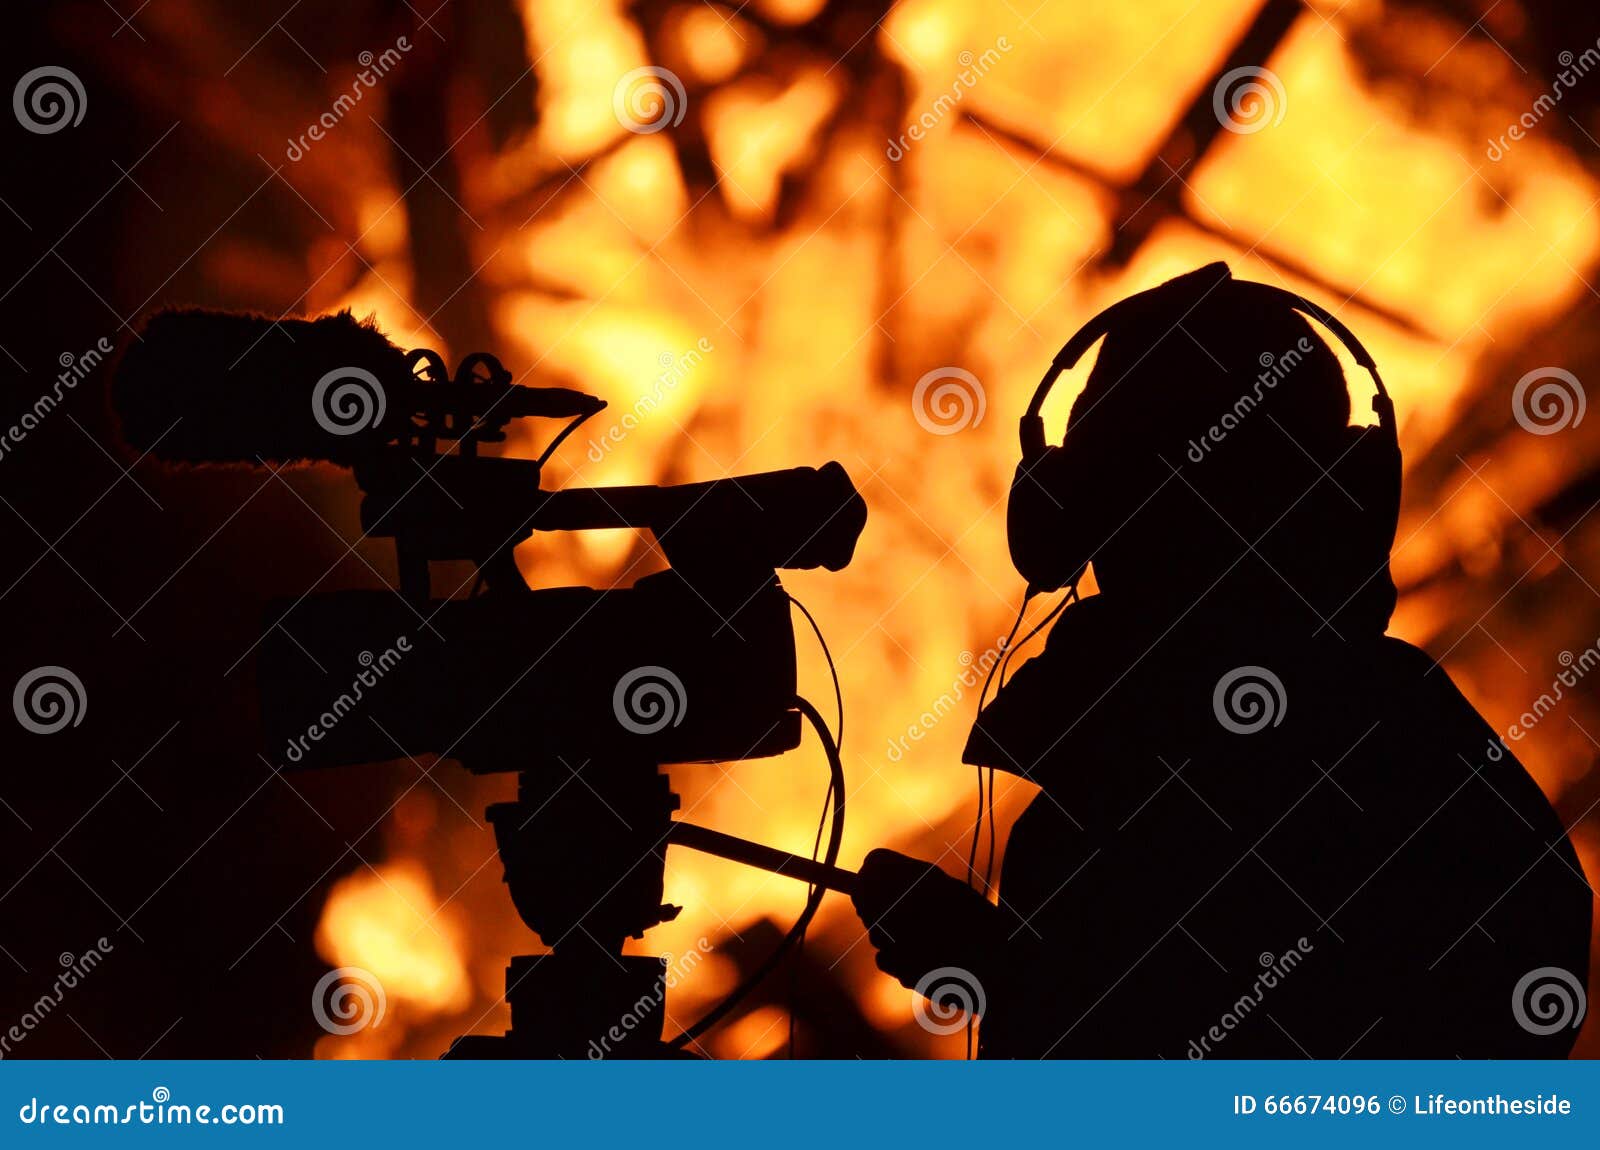 cameraman reporter journalist filming building on fire flames